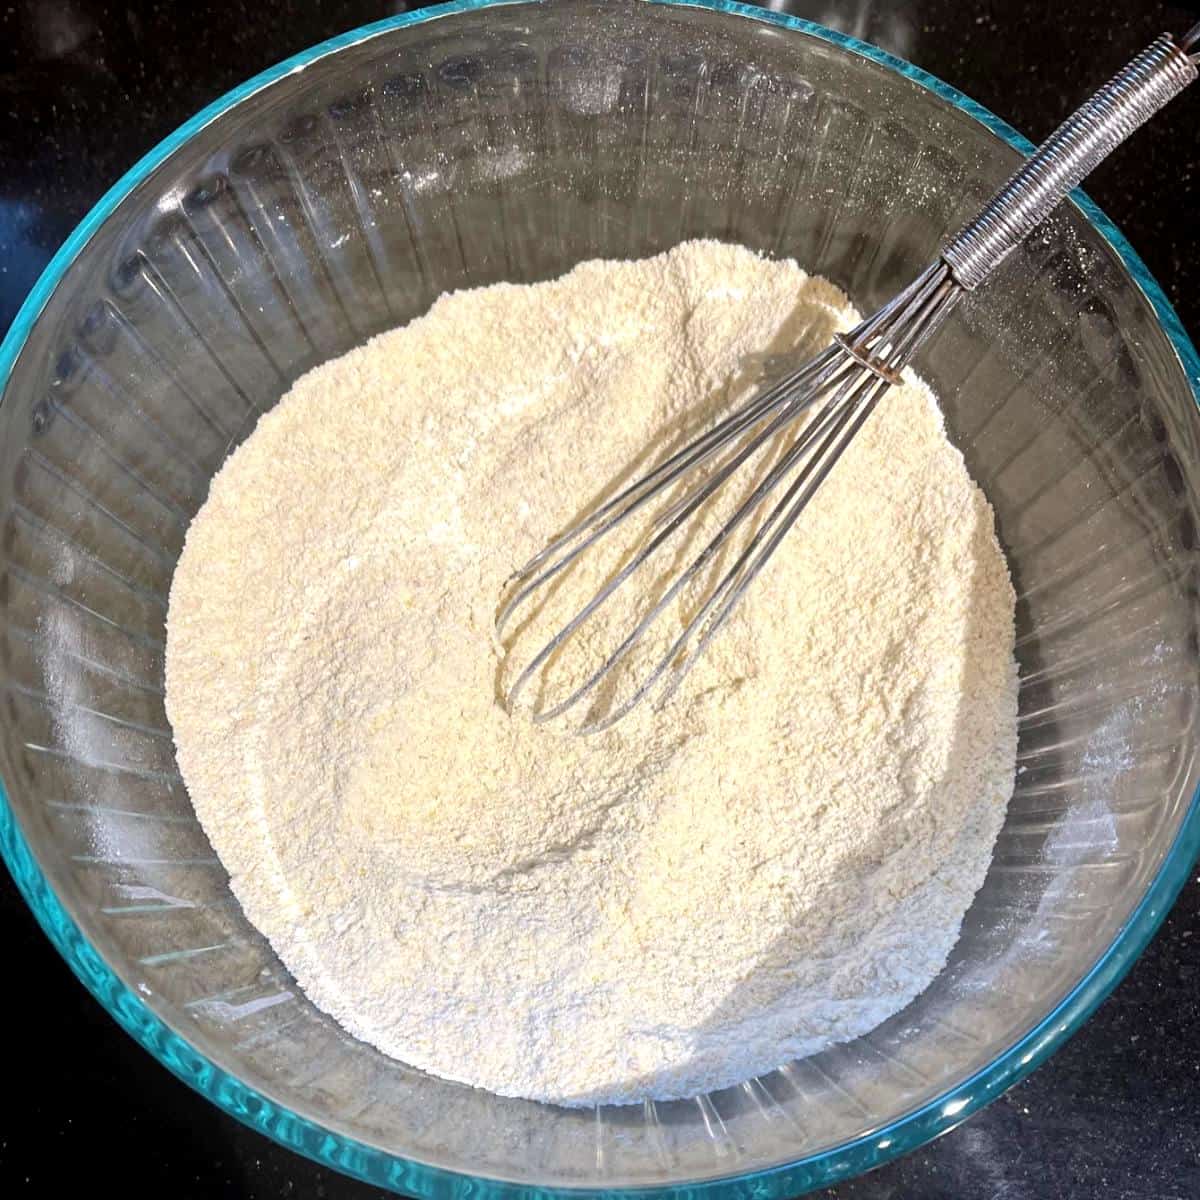 Flours whisked together in bowl with whisk.